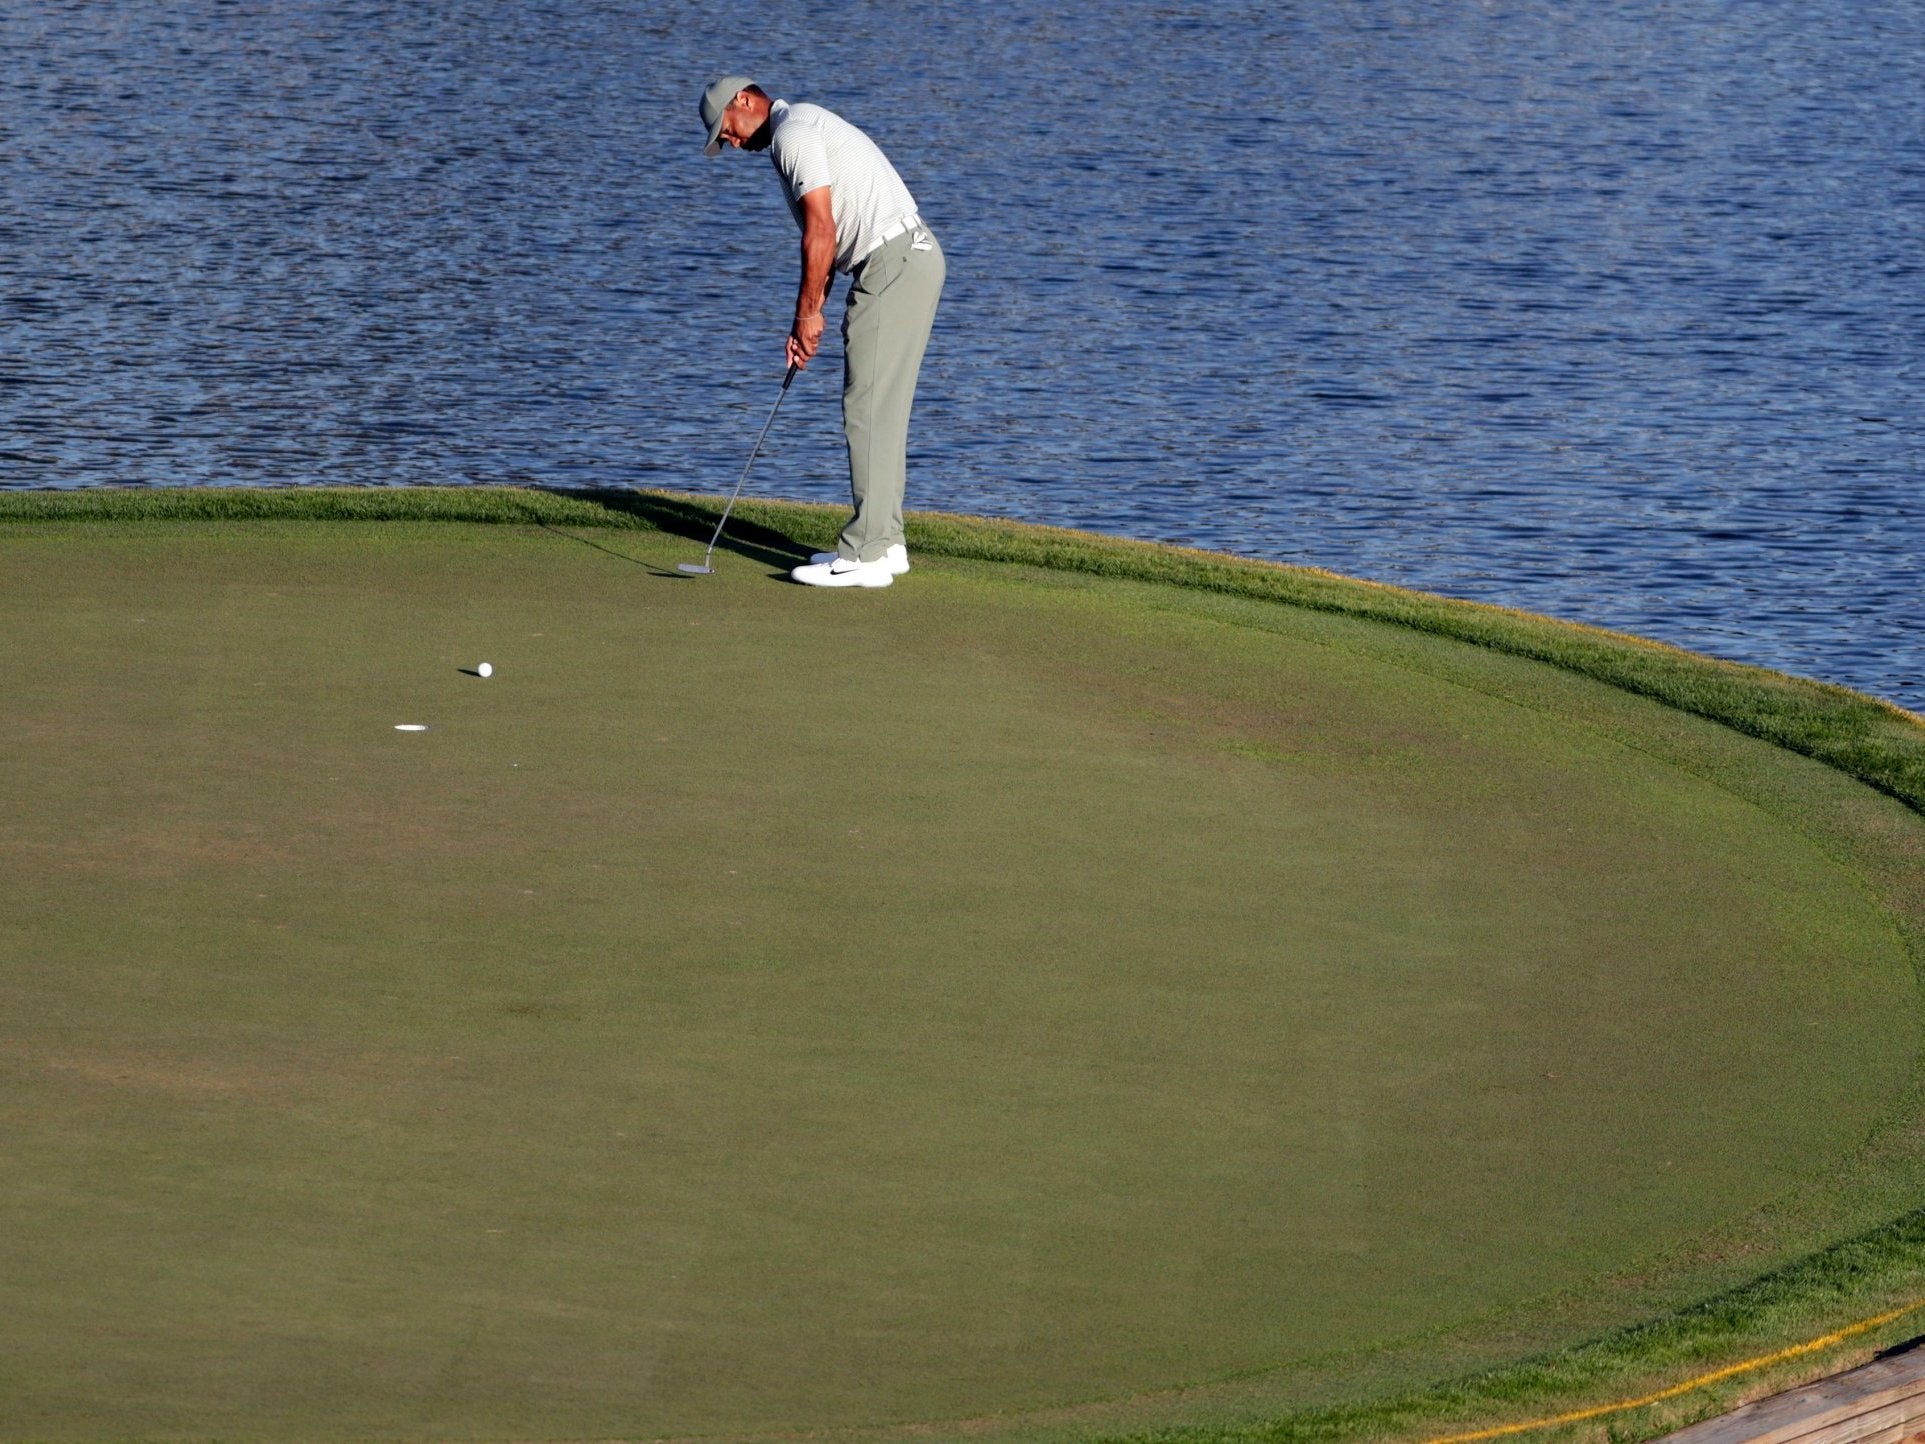 Tiger Woods putts on the famous 17th green